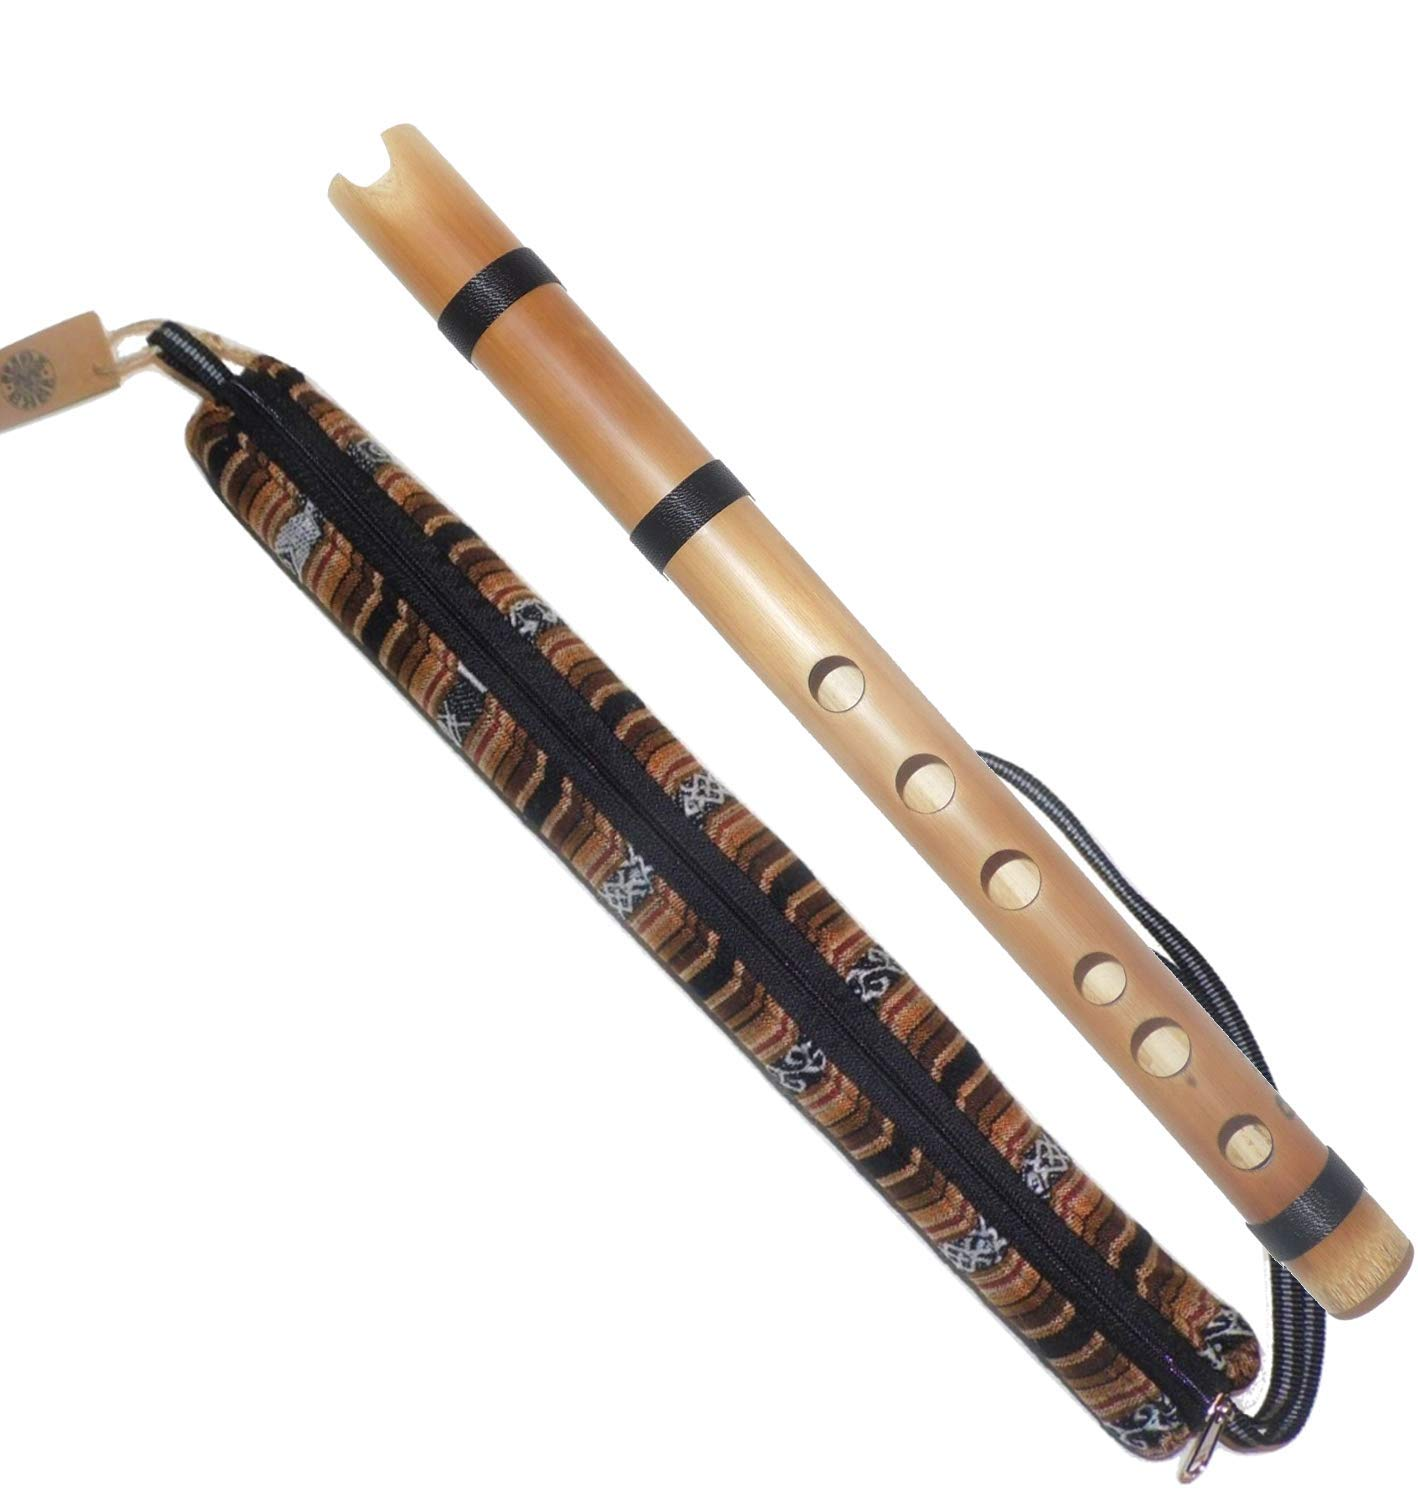 How to learn bamboo flute